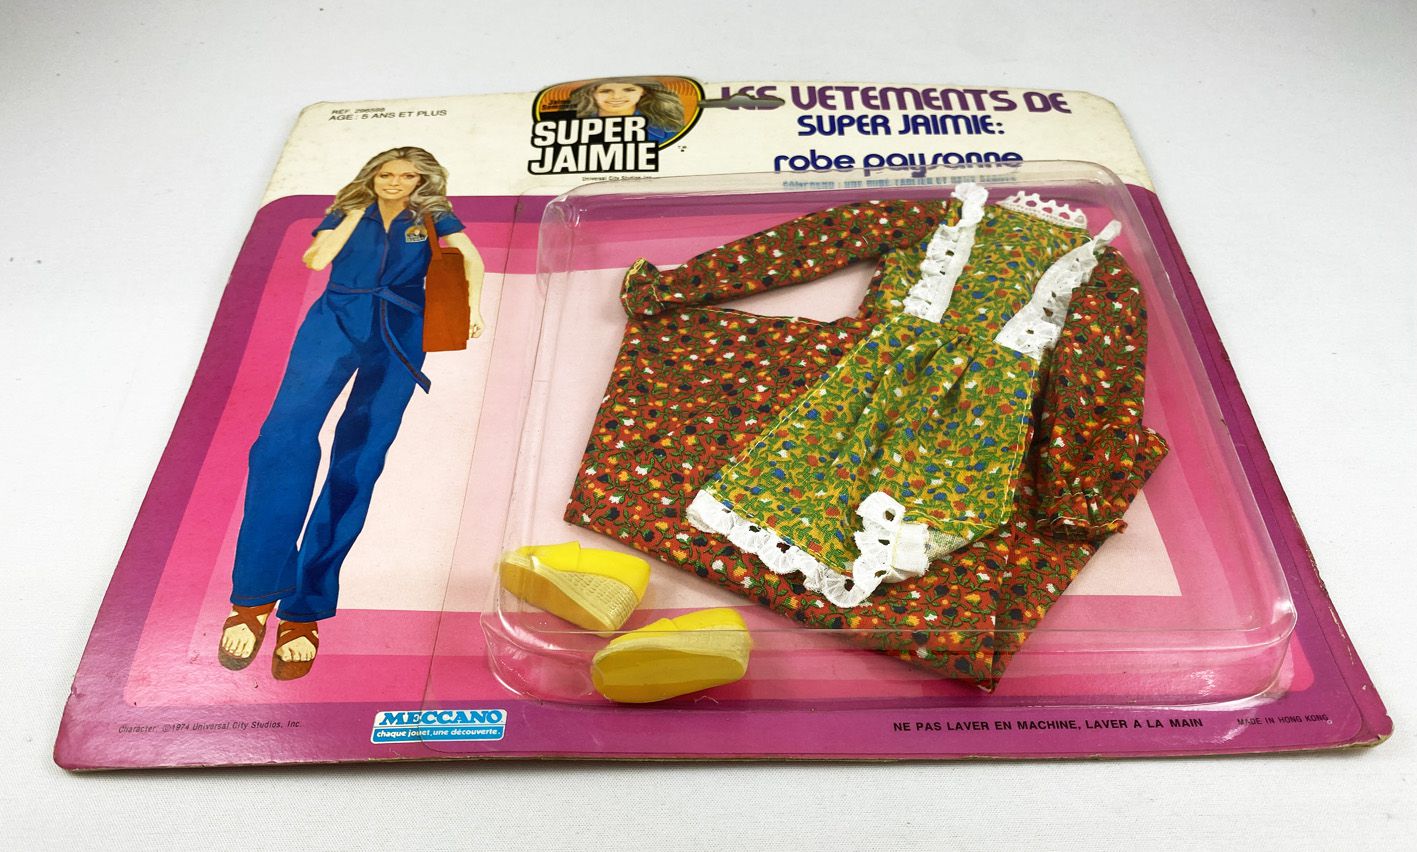 Bionic Woman - Fashion for Jaime Sommers - Country Comfort - Meccano